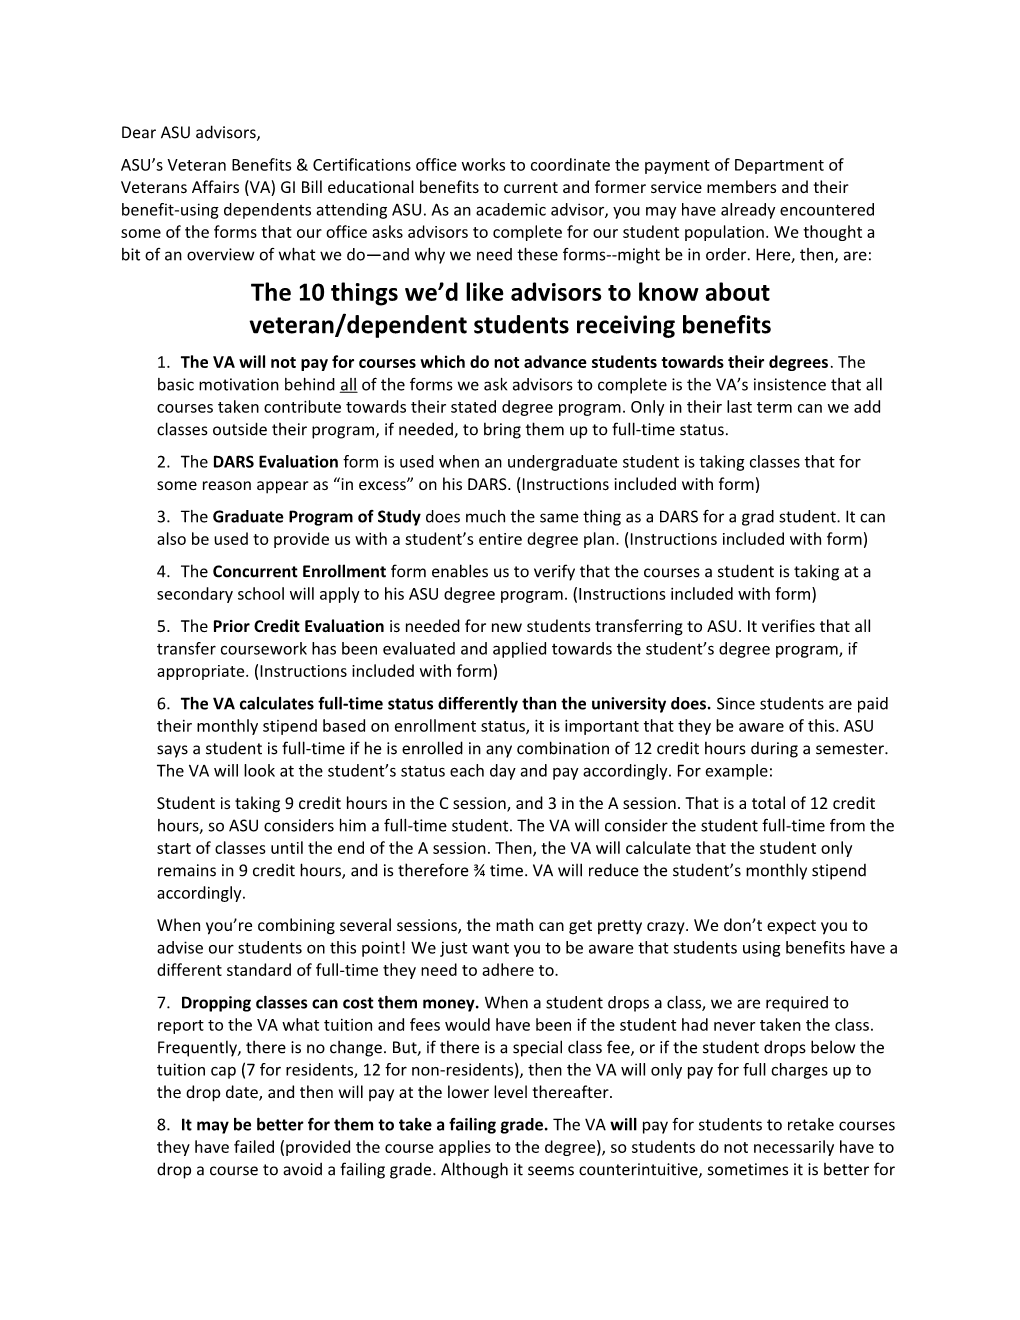 The 10 Things We D Like Advisors to Know About Veteran/Dependent Students Receiving Benefits